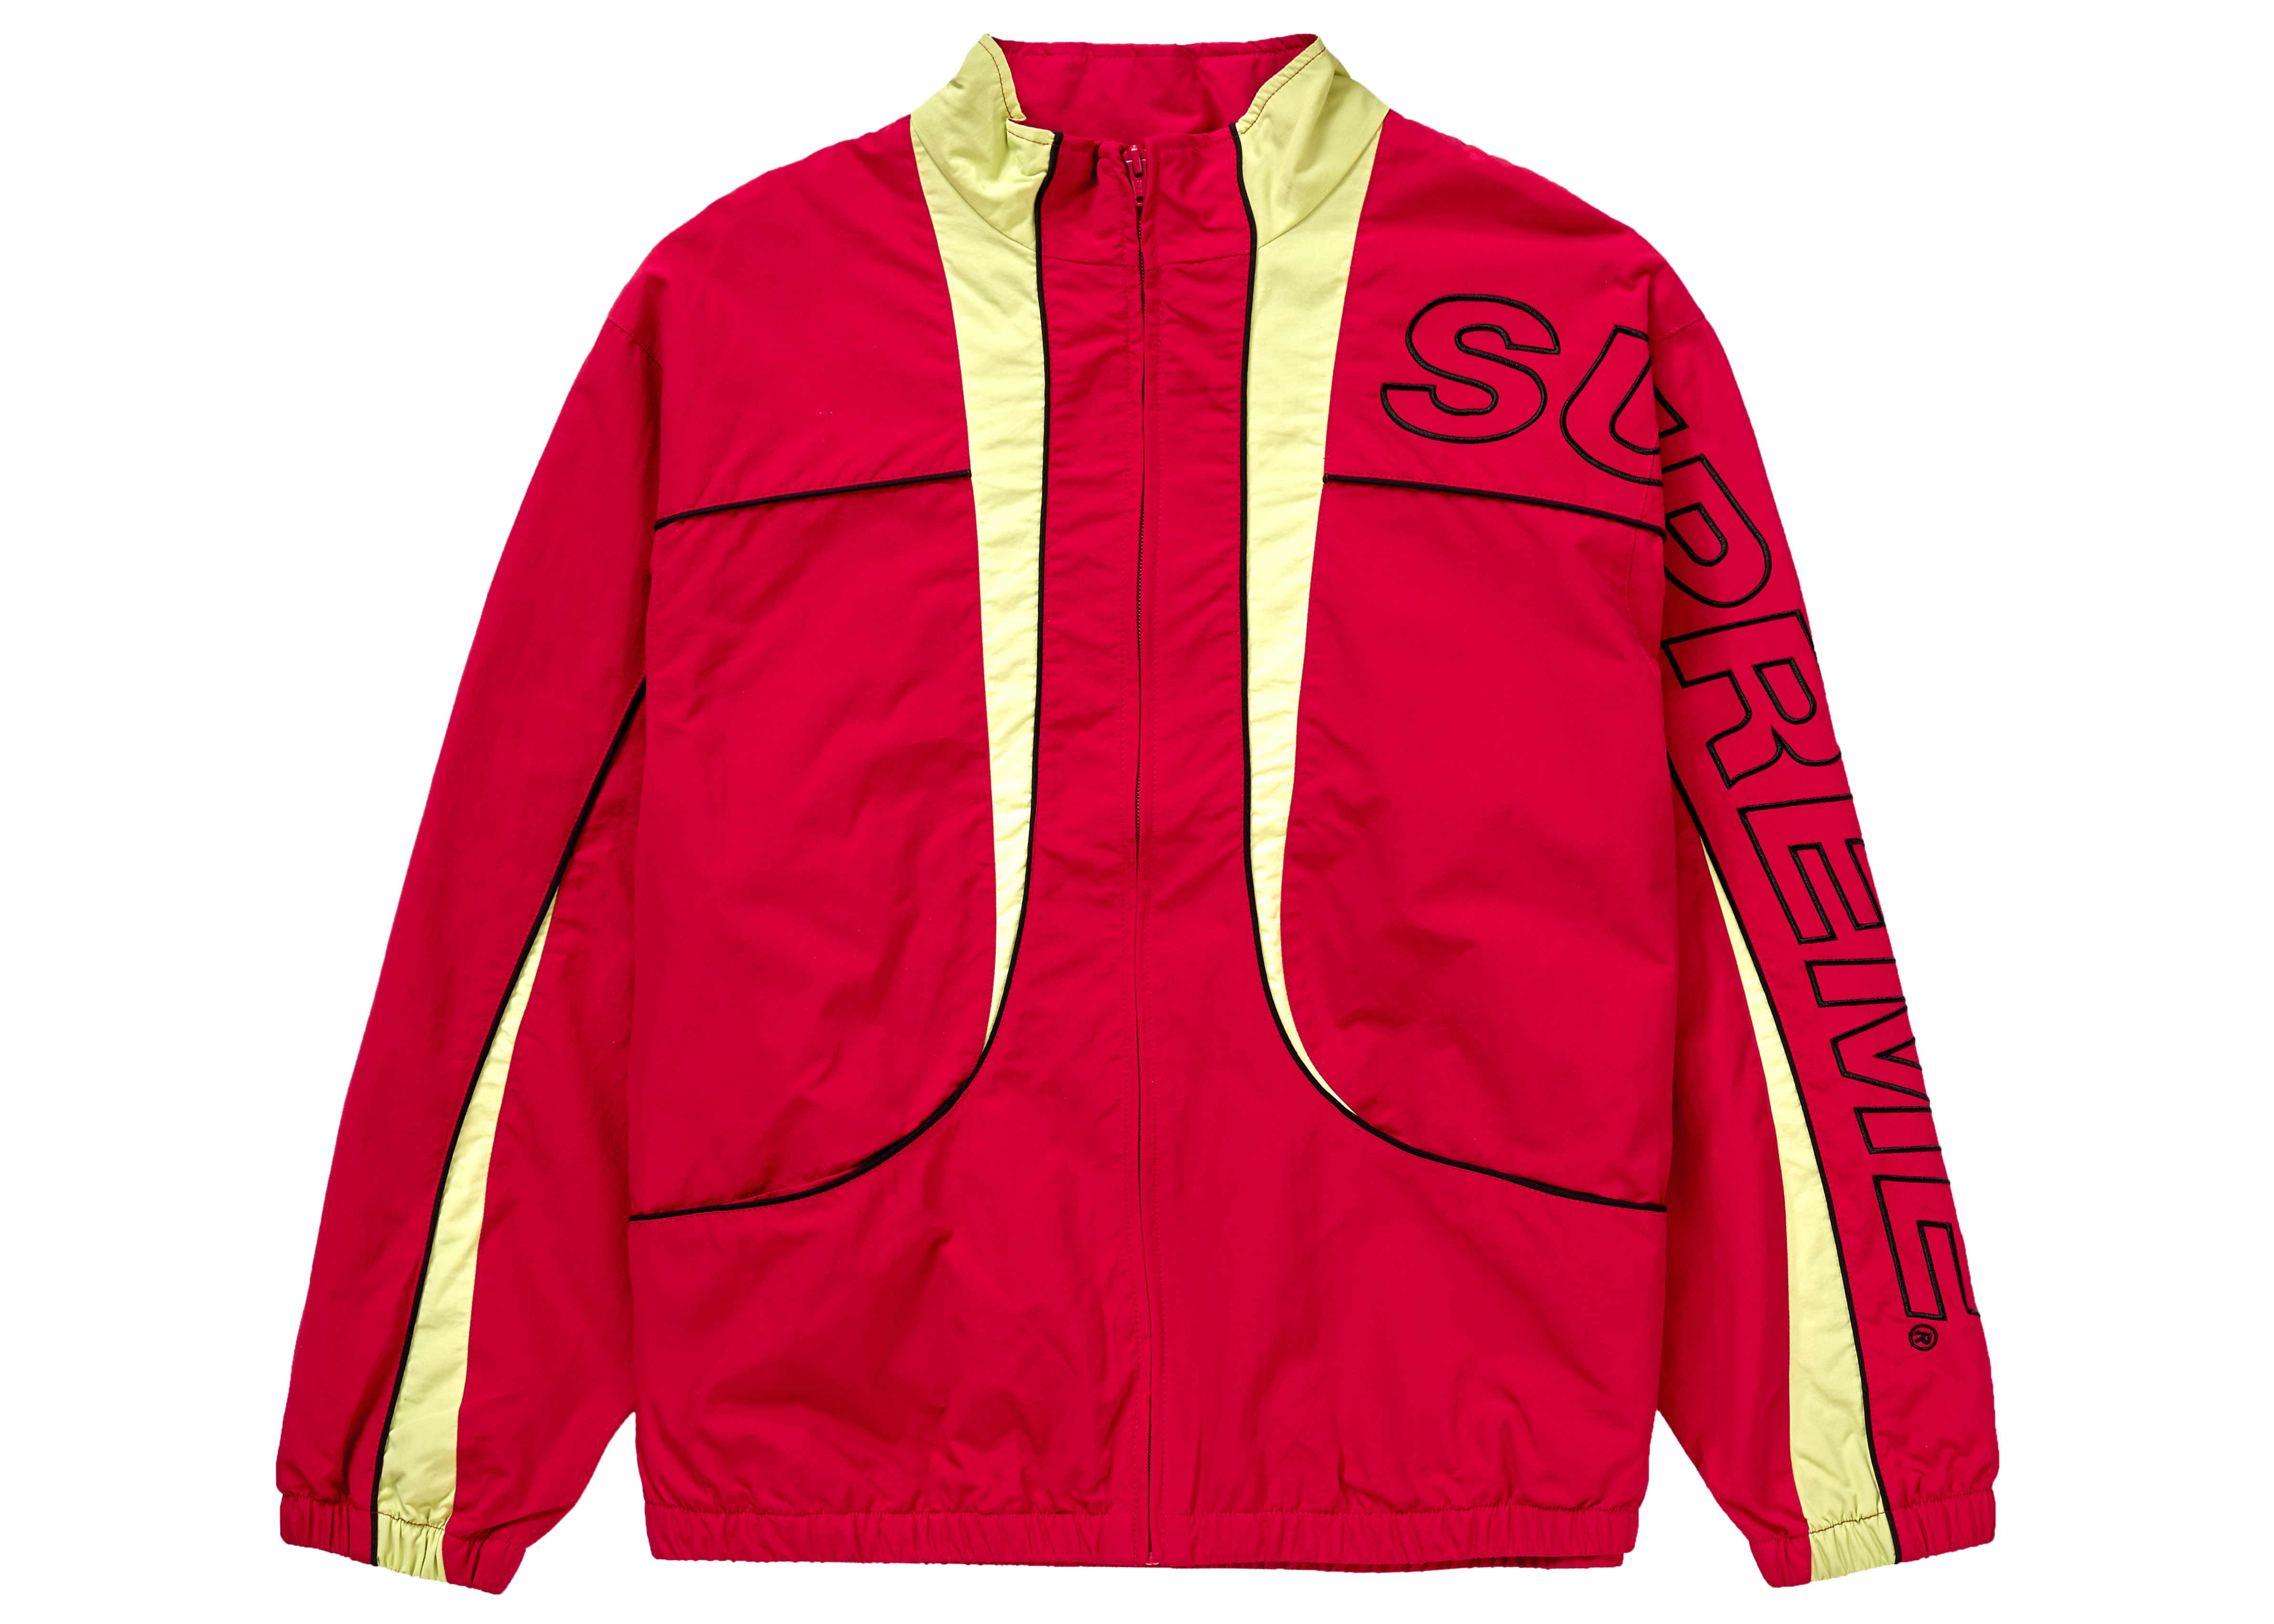 20AW Supreme Piping Track Jacket